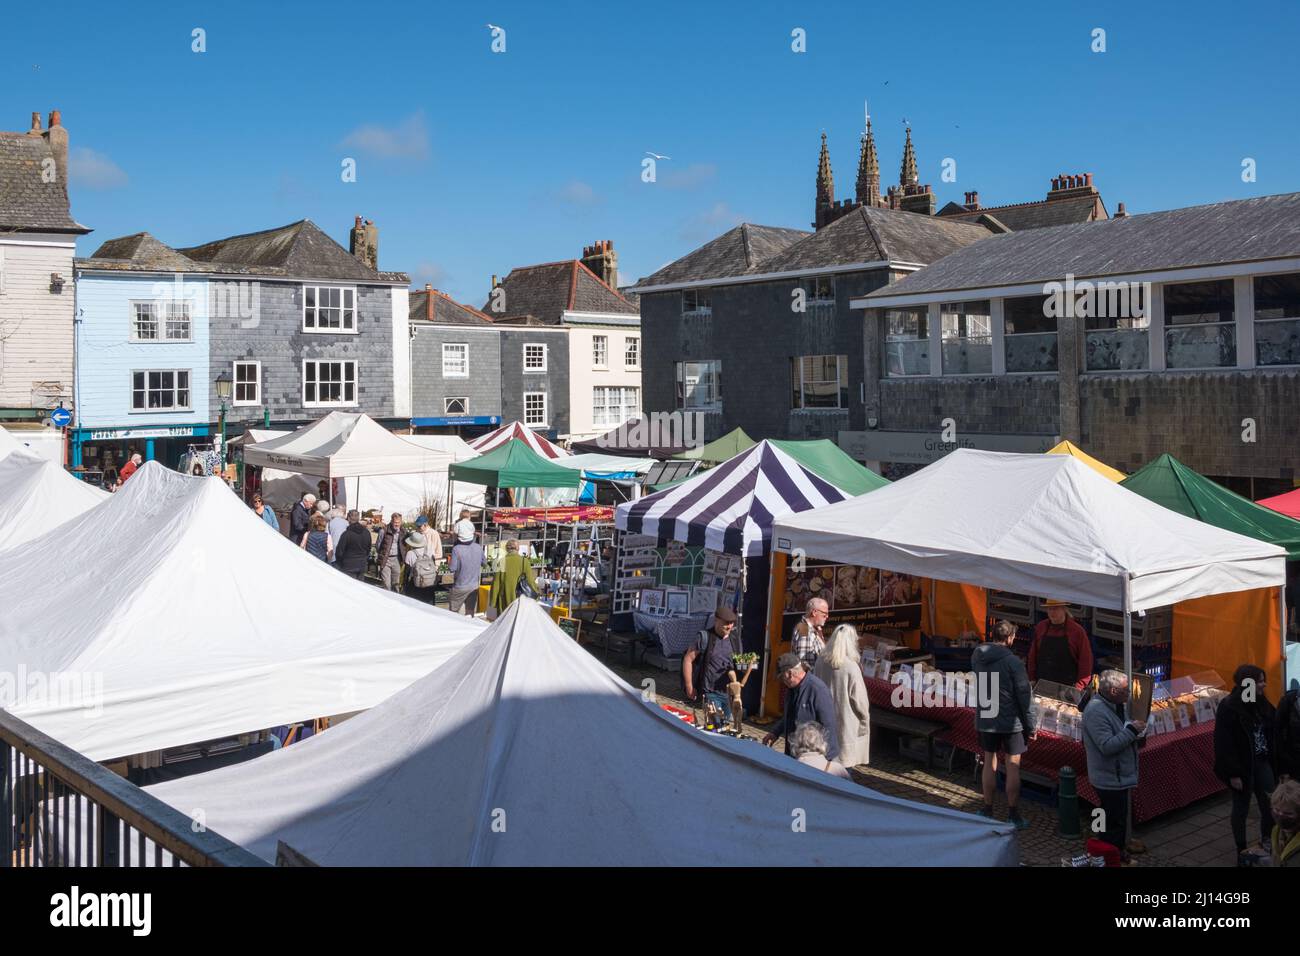 Totnes is a market town in South Devon at the head of the estuary of the River Dart. It is known for it's independent shops and healthy food. Stock Photo